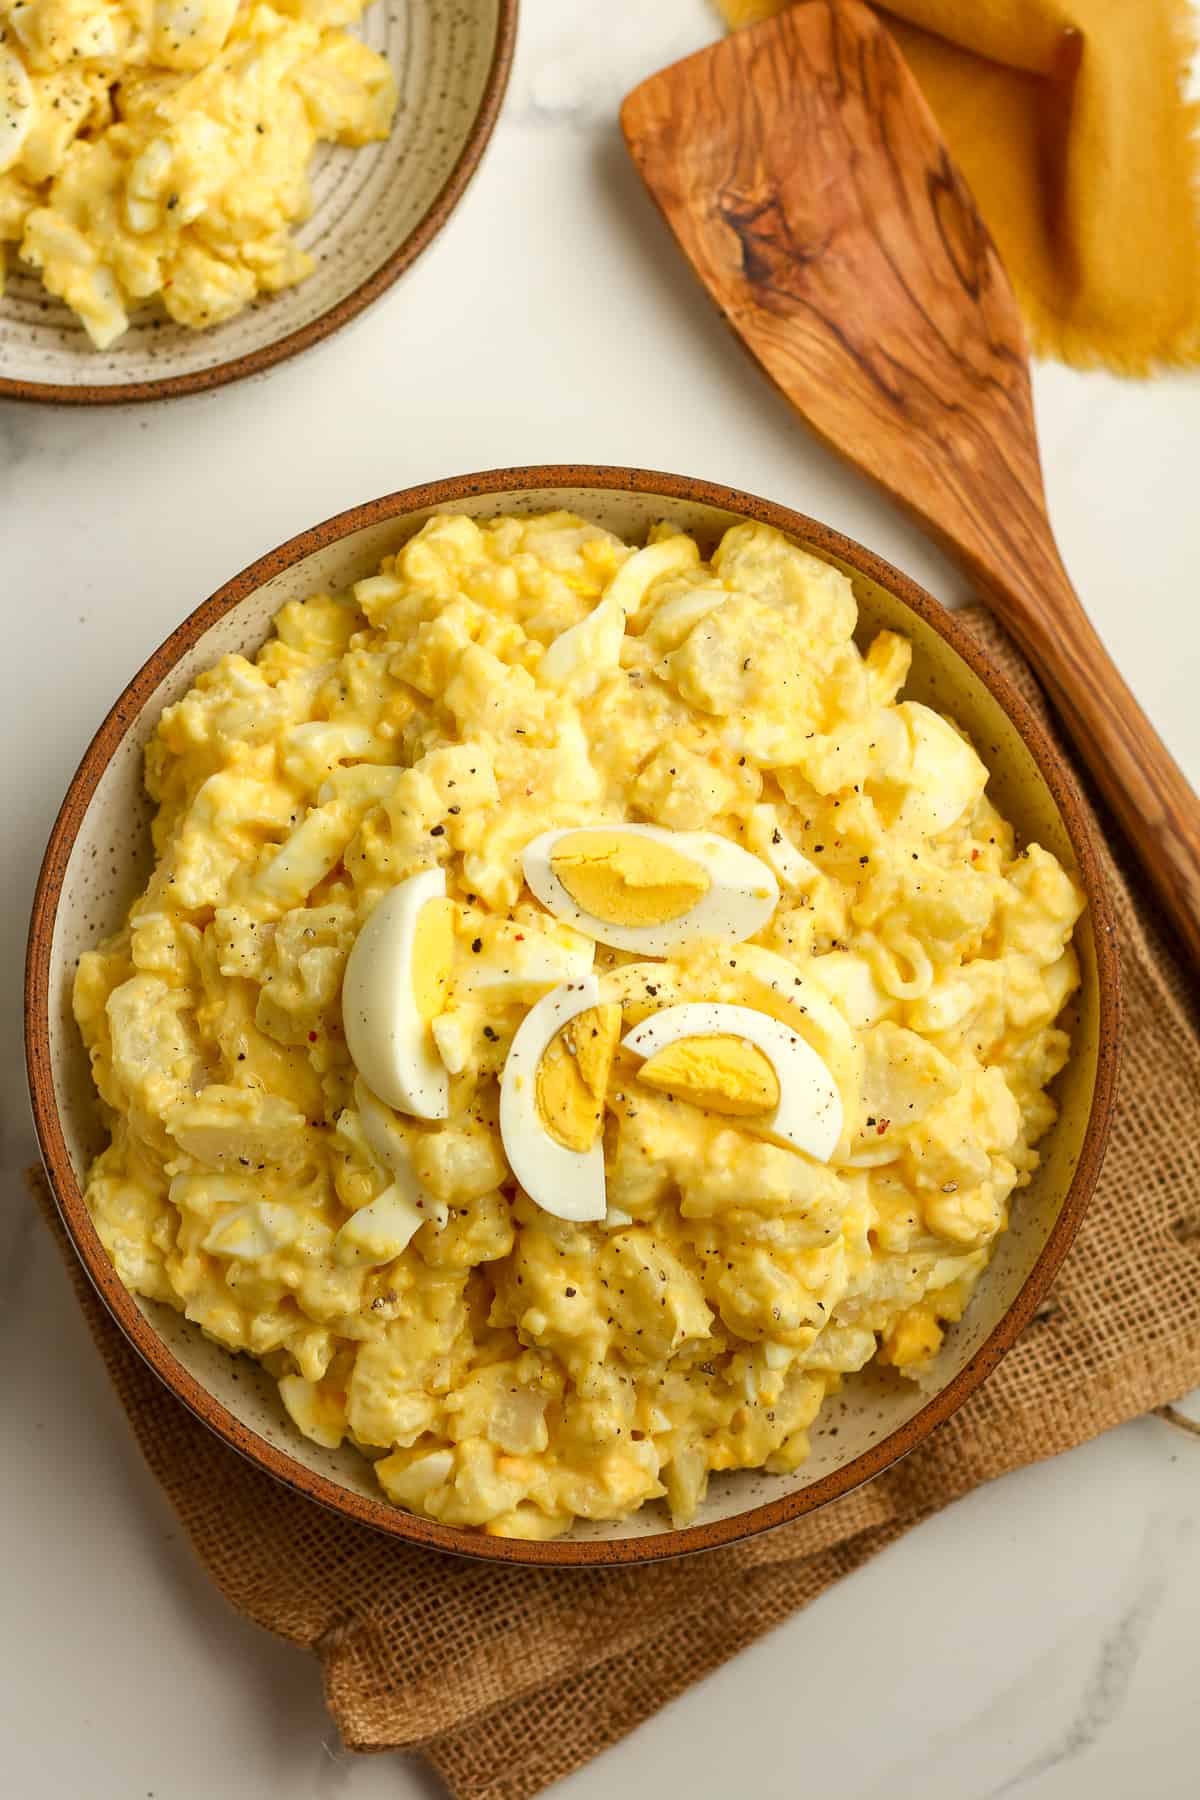 A large bowl of the creamy potato salad with a quartered egg on top.